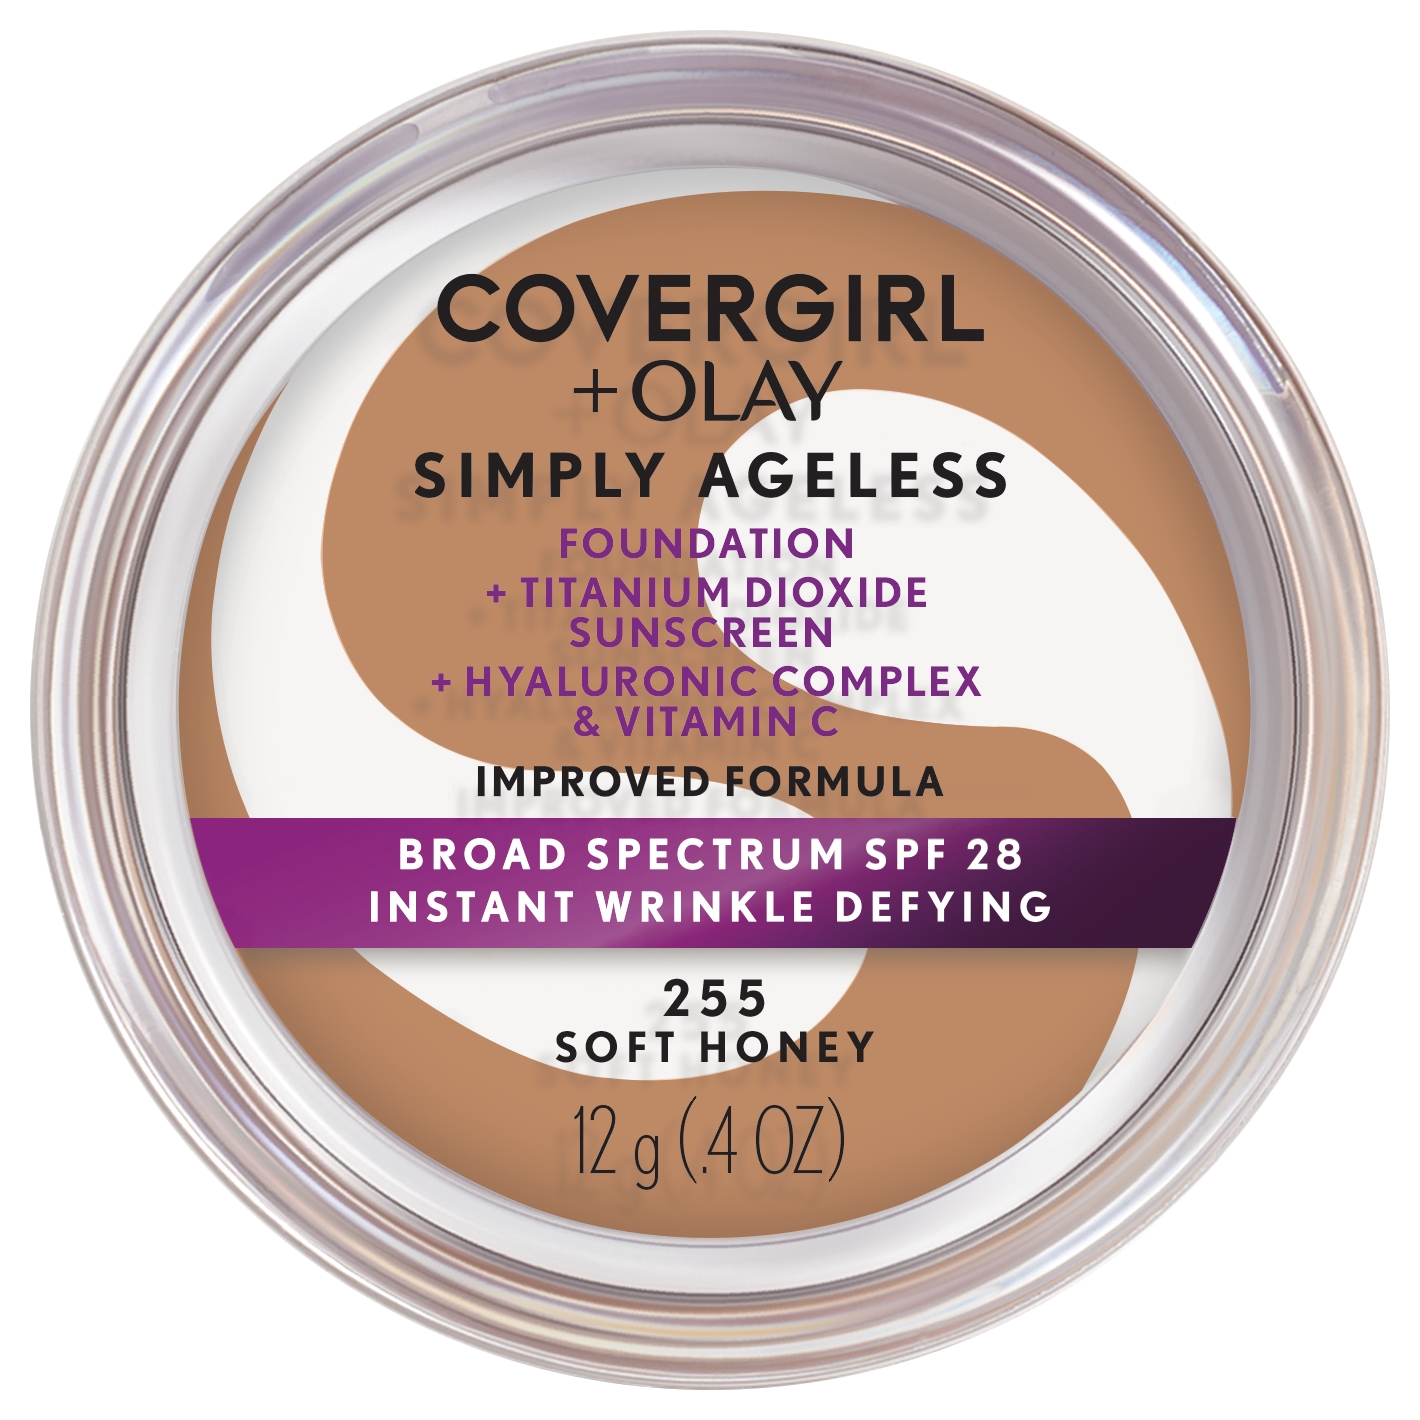 COVERGIRL + OLAY Simply Ageless Instant Wrinkle-Defying Foundation with SPF 28, Soft Honey, 0.44 oz - image 1 of 9